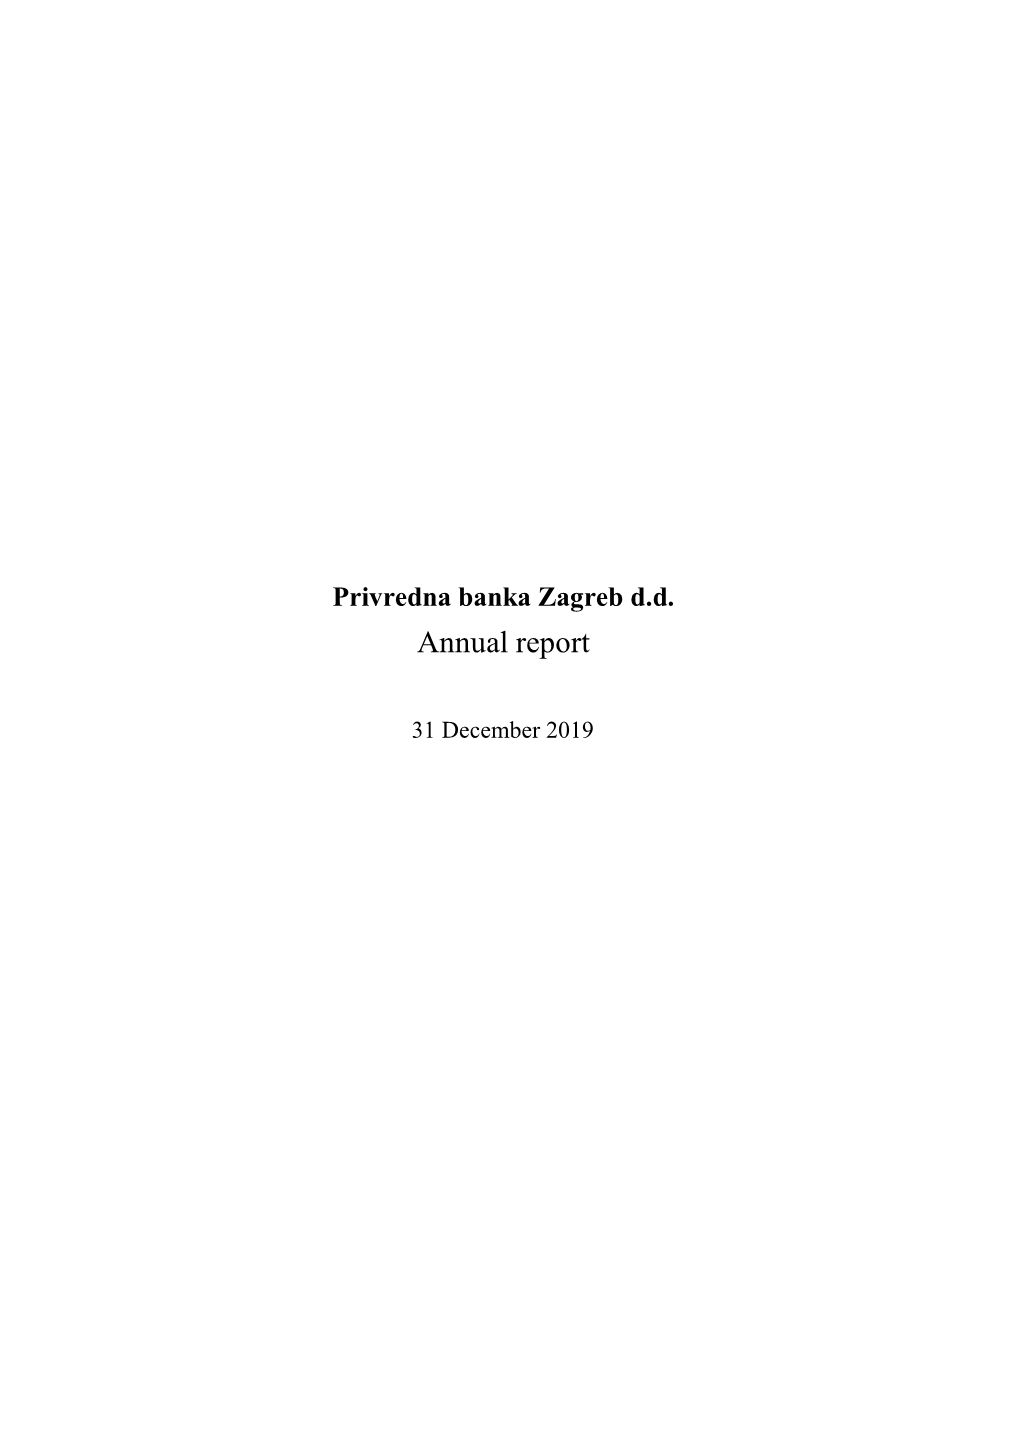 Privredna Banka Zagreb Dd., I Am Honored to Present You the Business Results of the Bank and the Group for the Year 2019